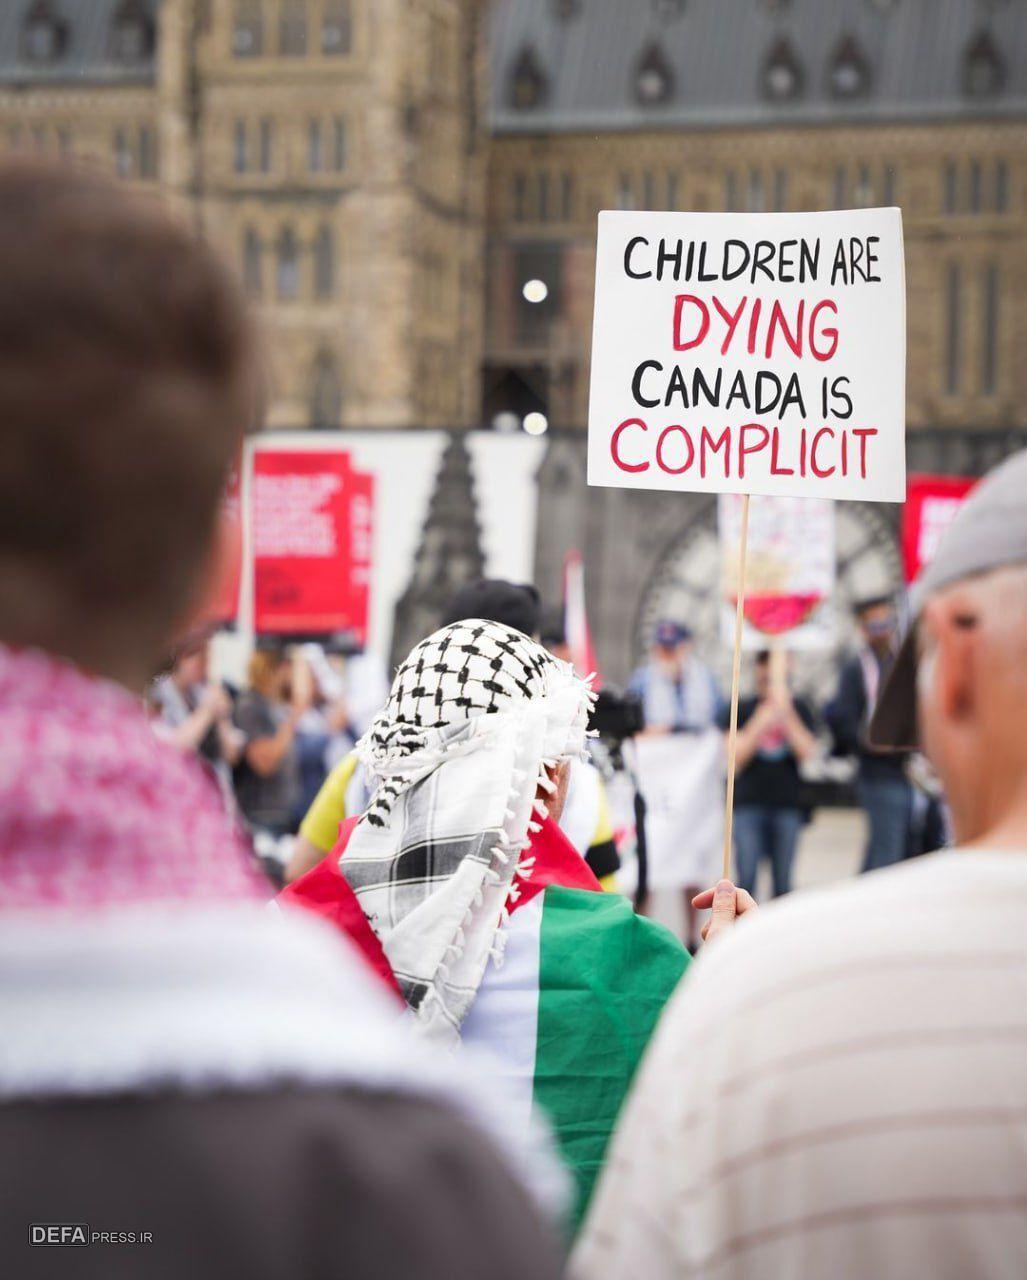 Canadian pro-Palestinians honored the memory of the martyred children of Gaza